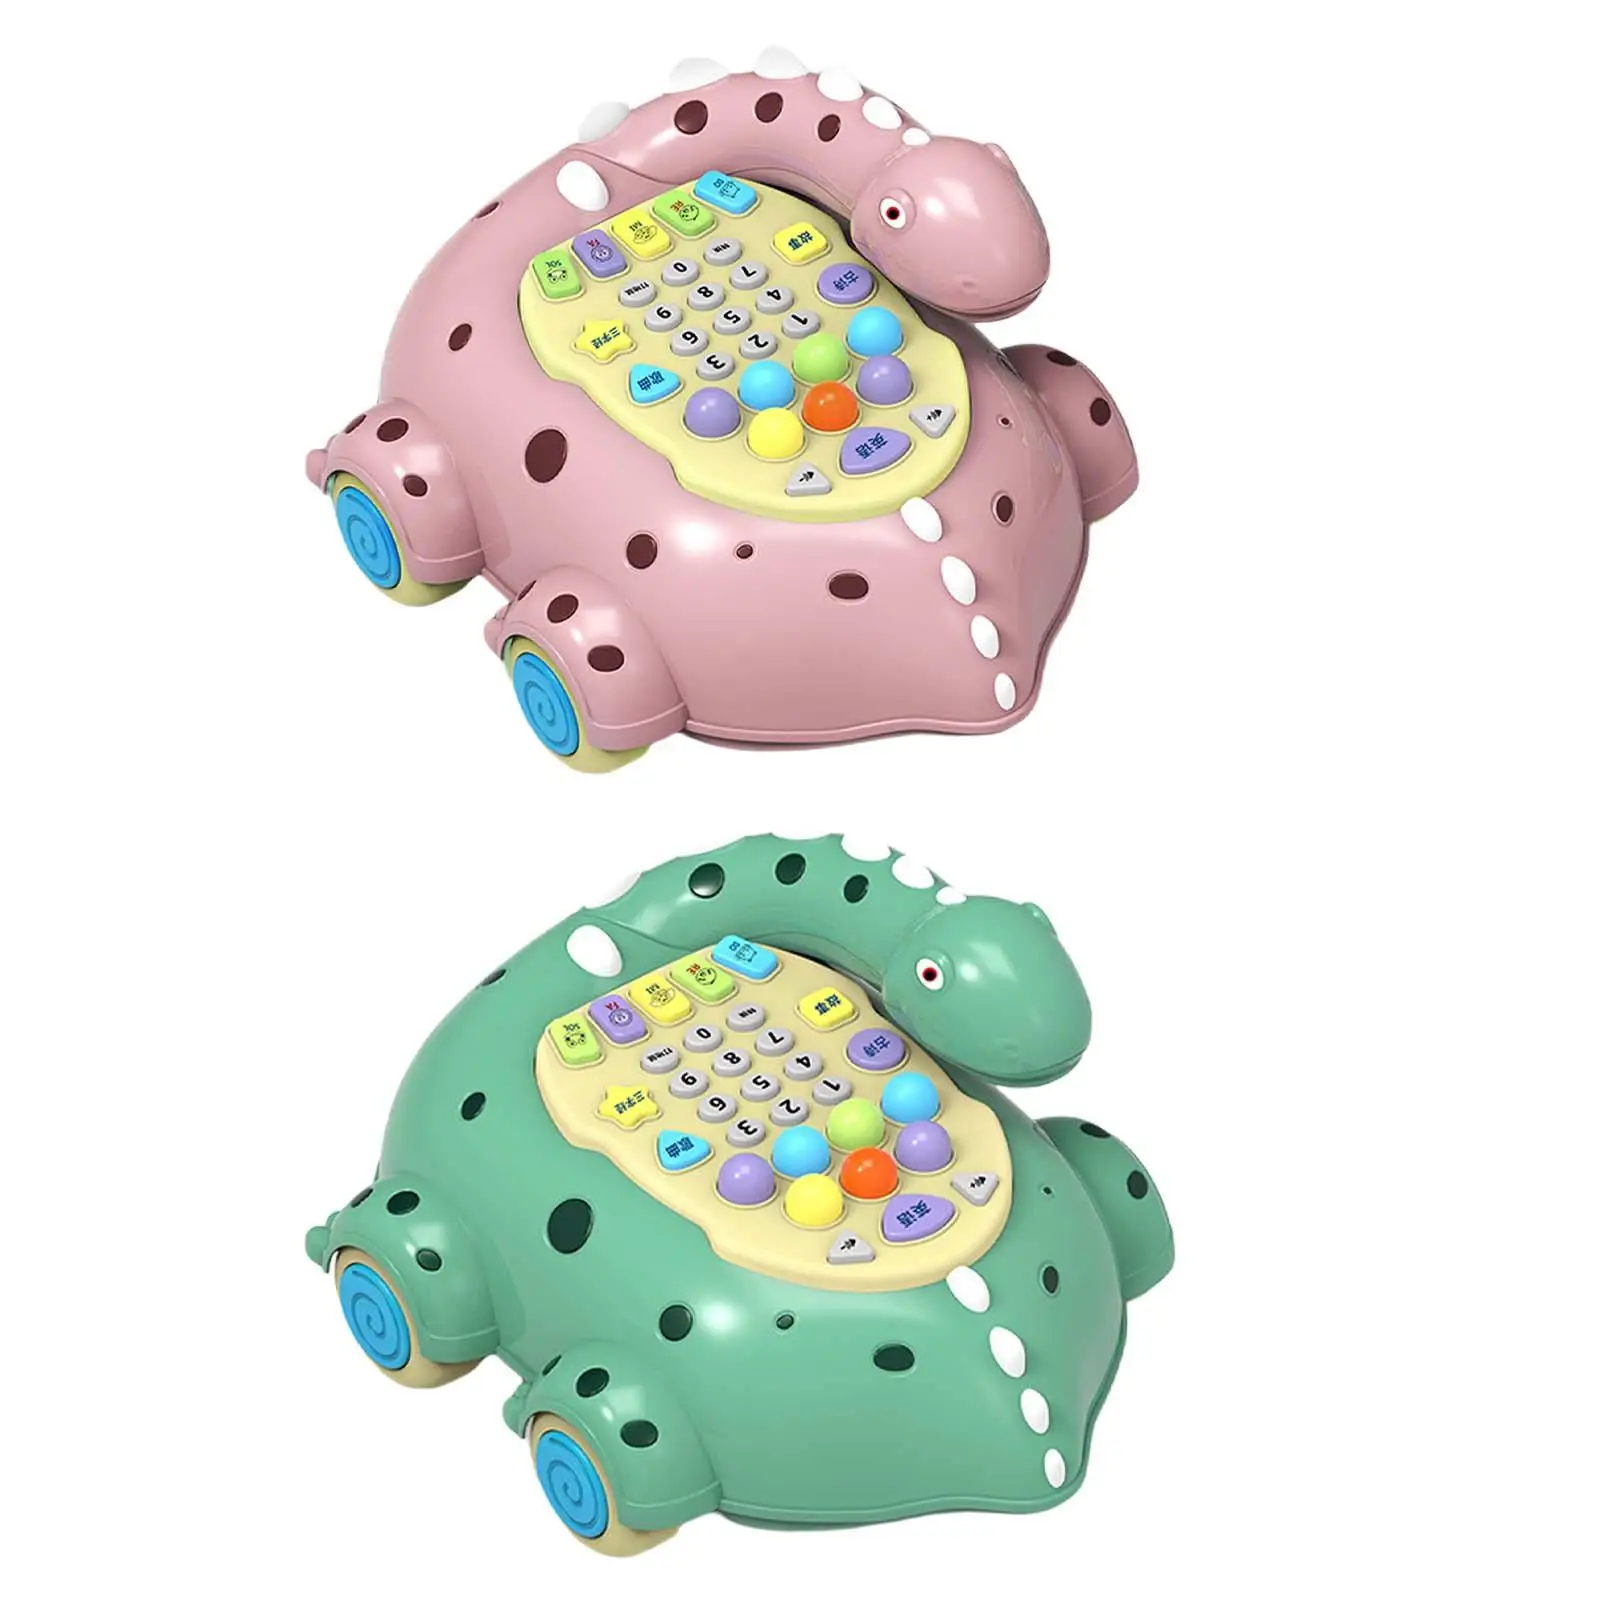 Kids Musical Telephone Toys Car Hand Eye Coordination Music Light Phone Toy for Gift Activity Learning Development Interaction